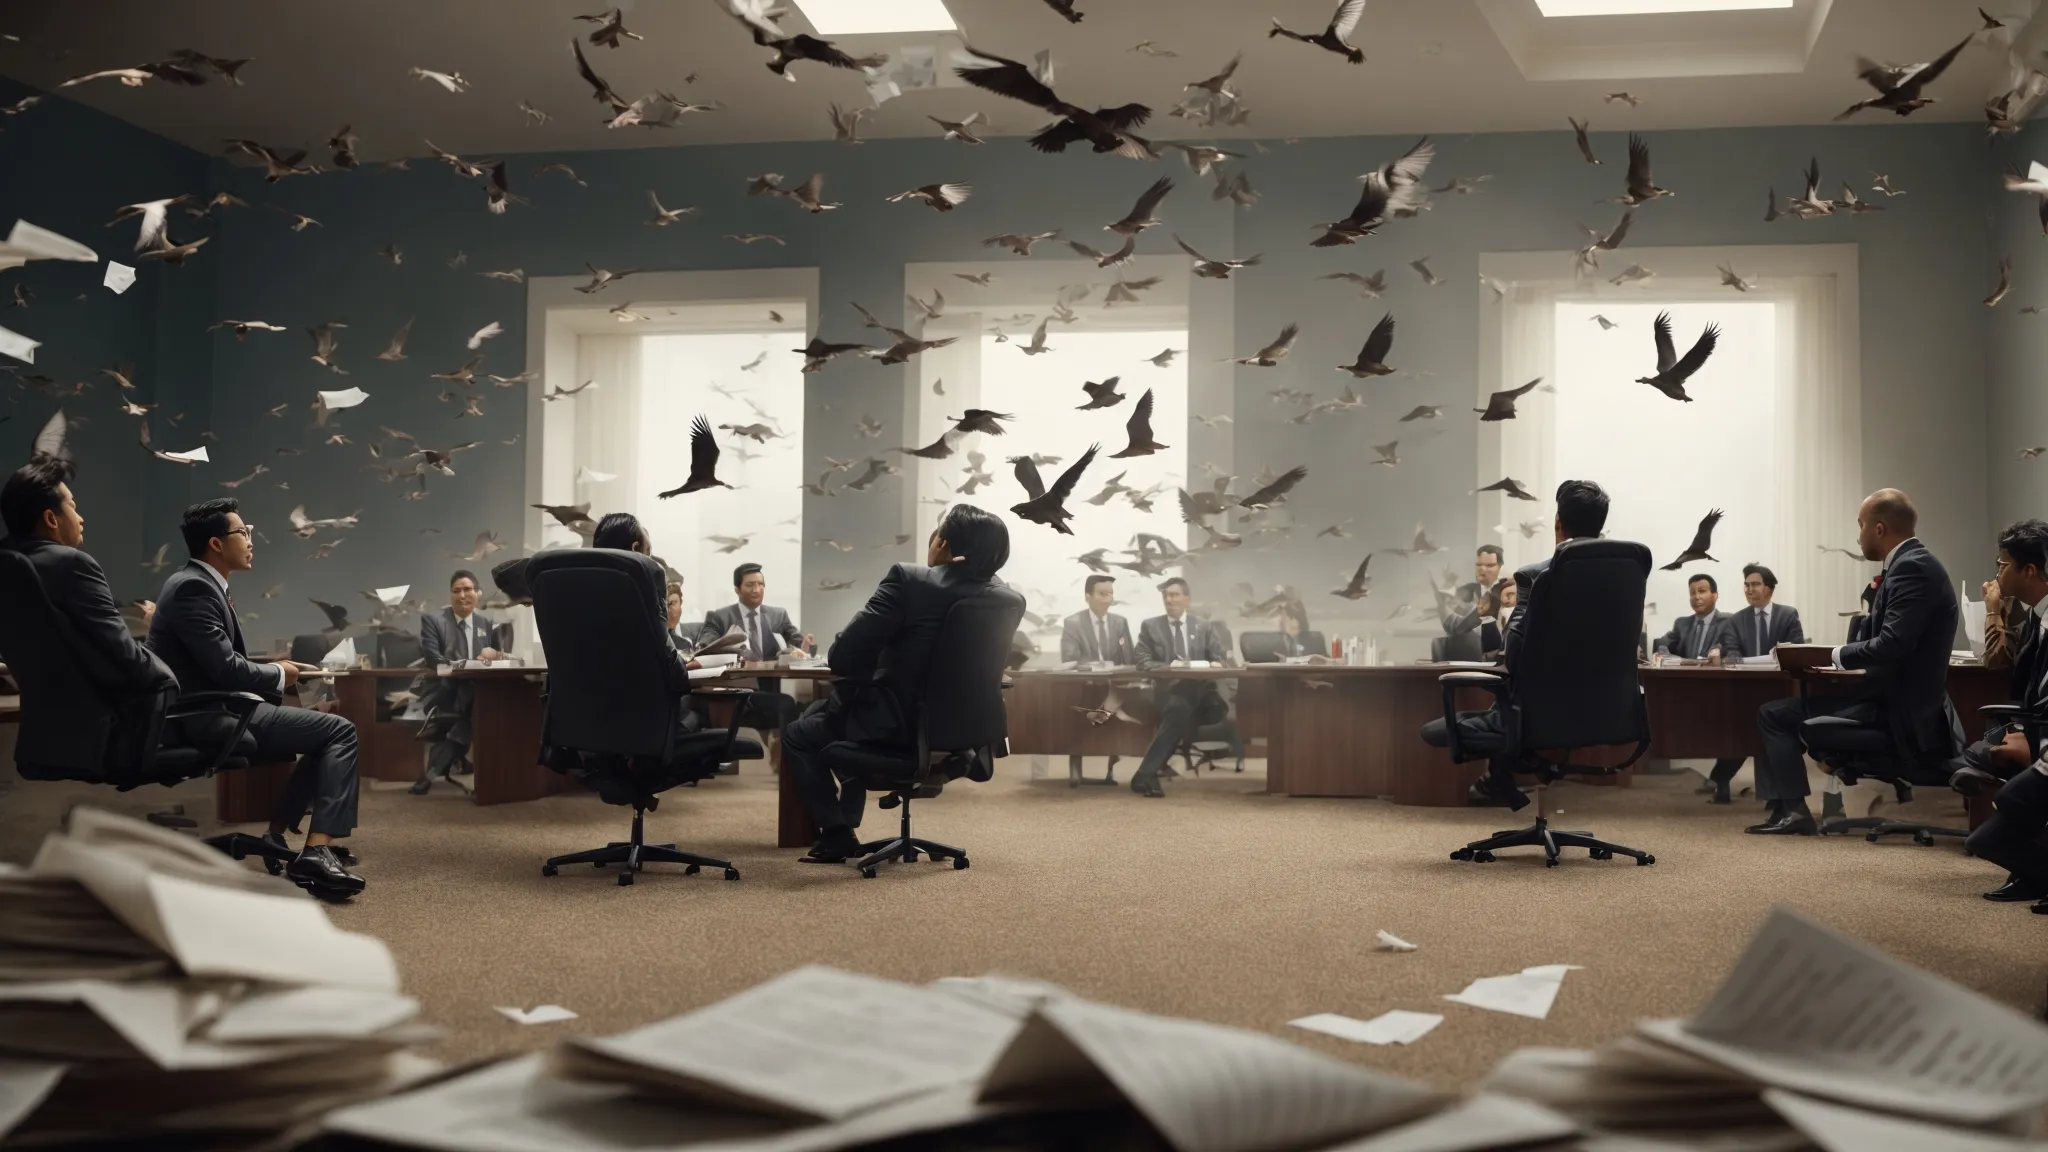 a flock of startled birds taking flight above a disrupted boardroom where scattered papers and unsettled investors suggest a tumultuous meeting.